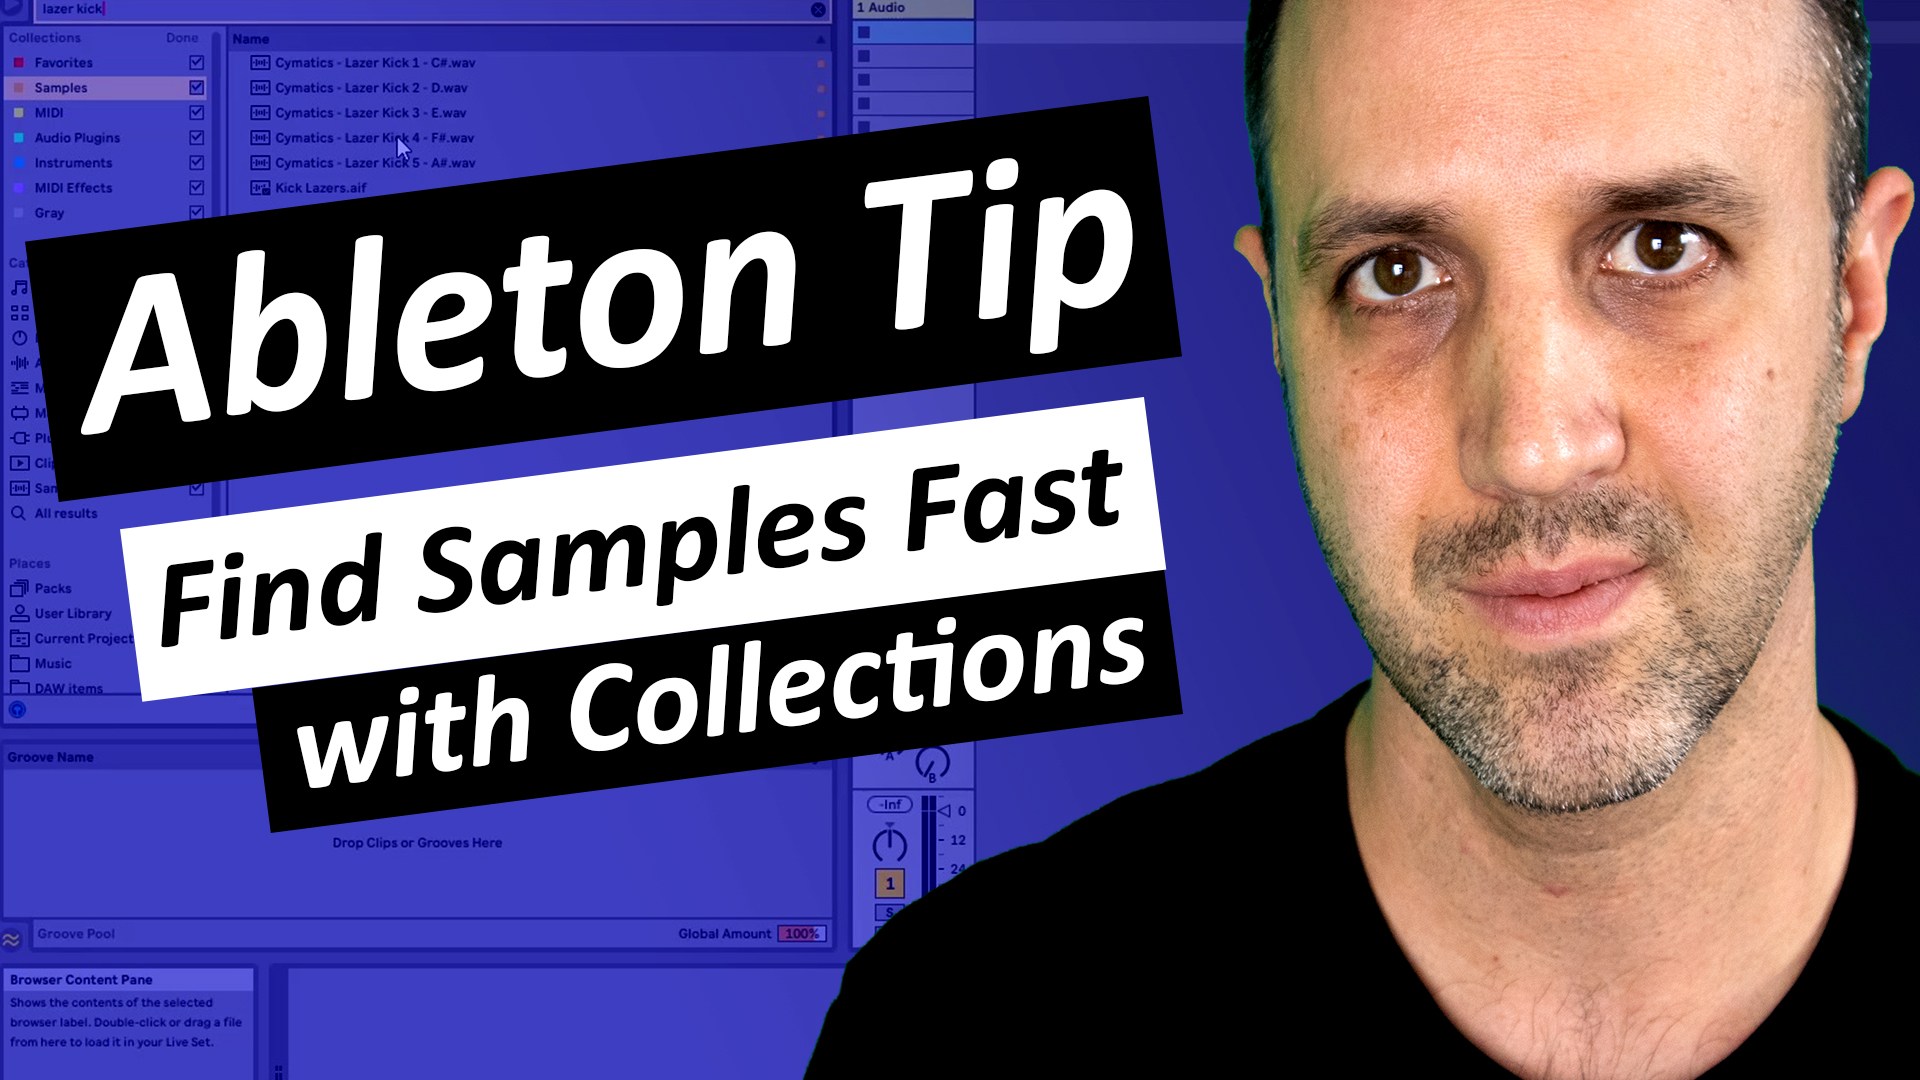 Ableton Tip - Find Samples Fast Using Collections